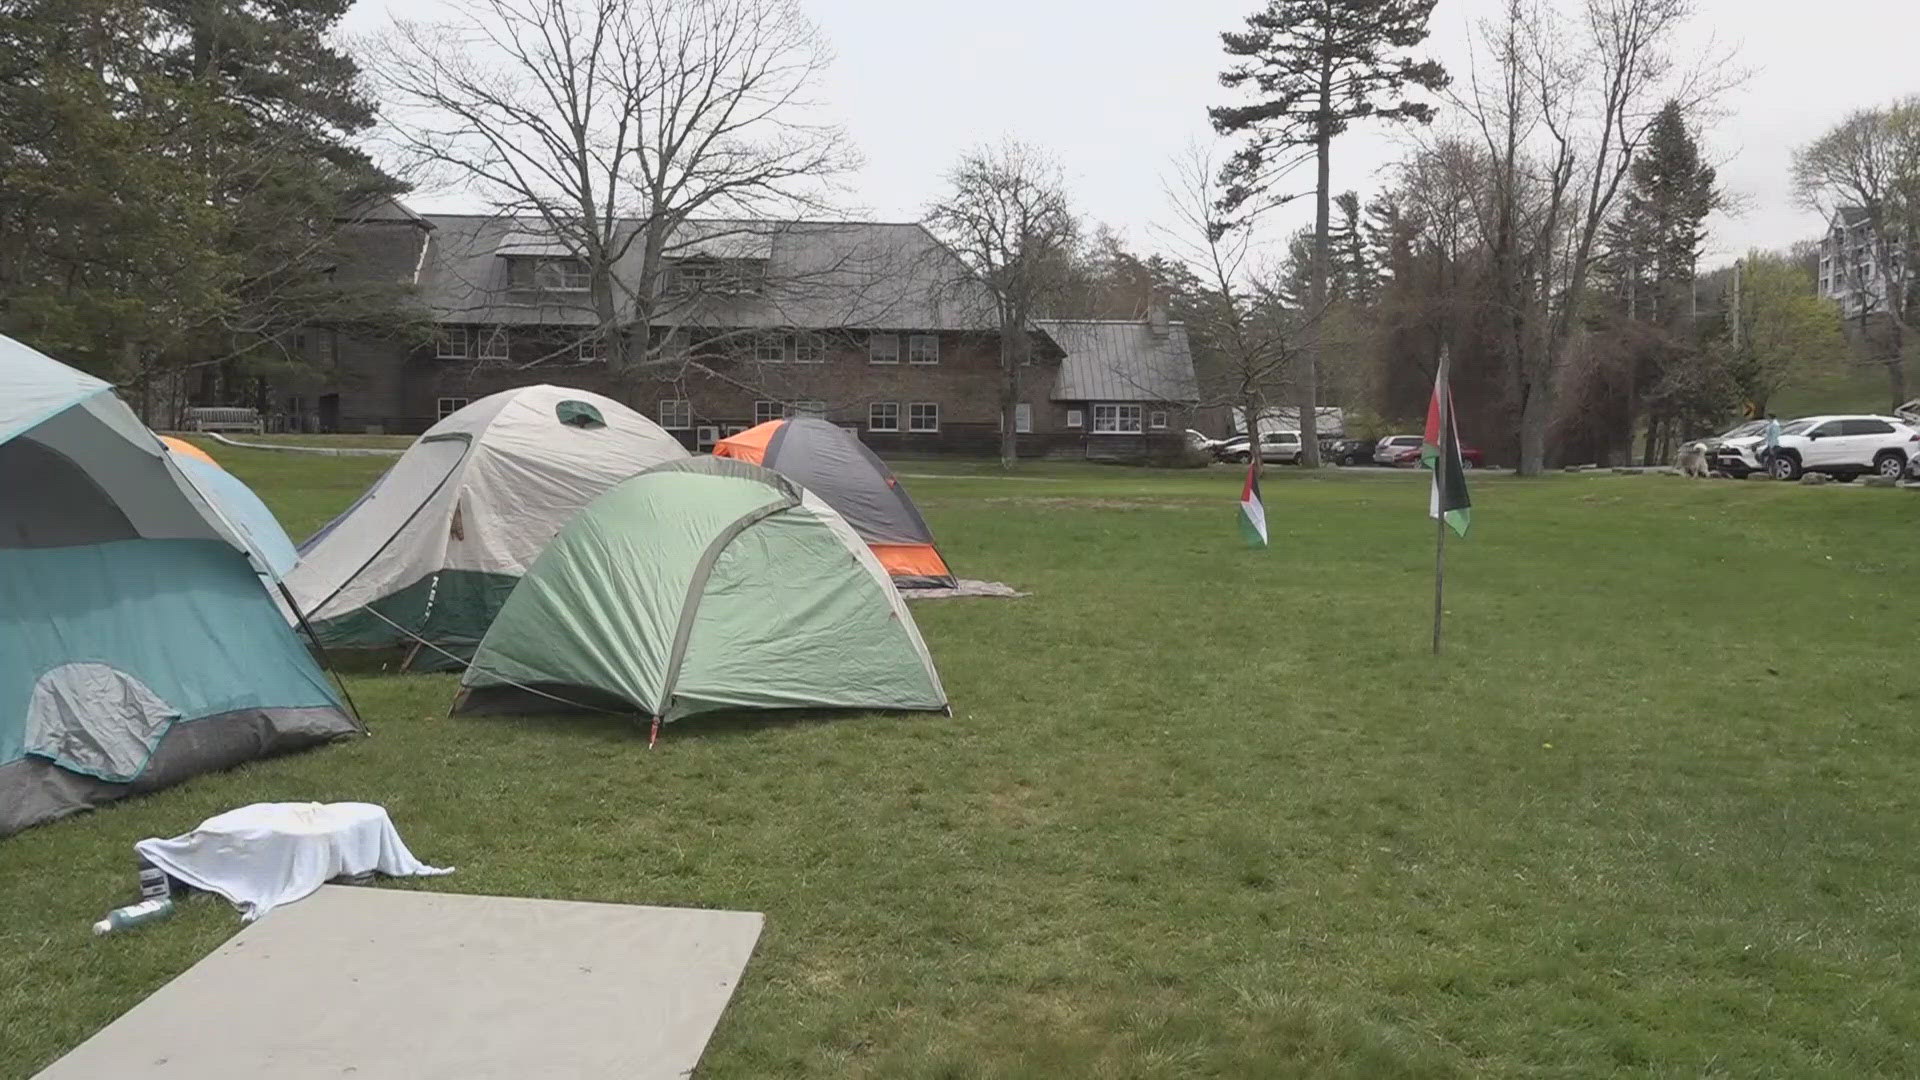 Nearly 80 students at the school are living in an encampment in solidarity with Palestine.